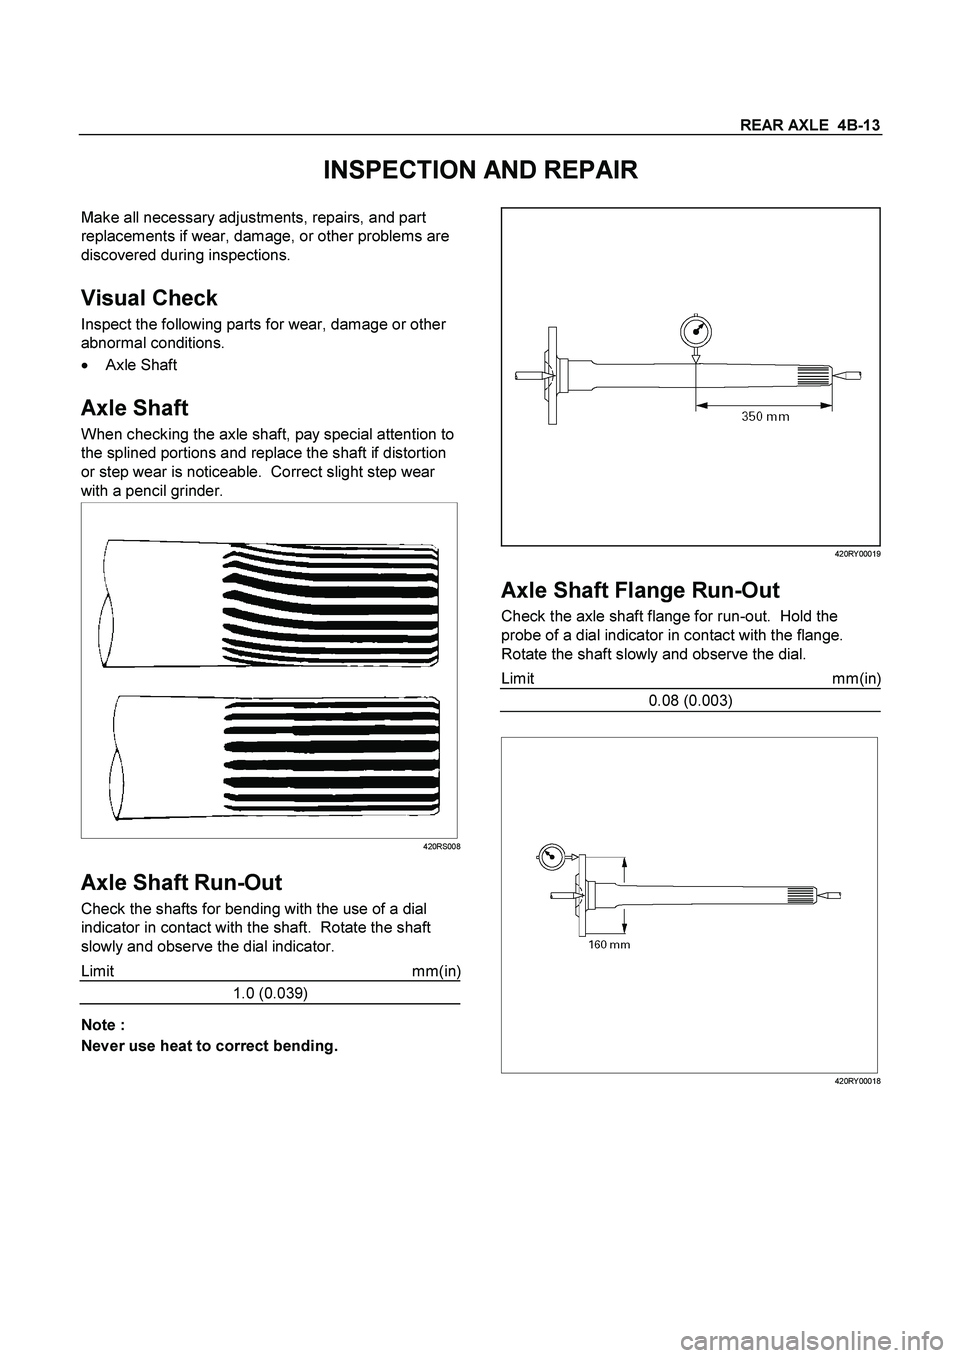 ISUZU TF SERIES 2004  Workshop Manual REAR AXLE  4B-13
 
INSPECTION AND REPAIR 
Make all necessary adjustments, repairs, and part 
replacements if wear, damage, or other problems are 
discovered during inspections. 
 
Visual Check 
Inspec